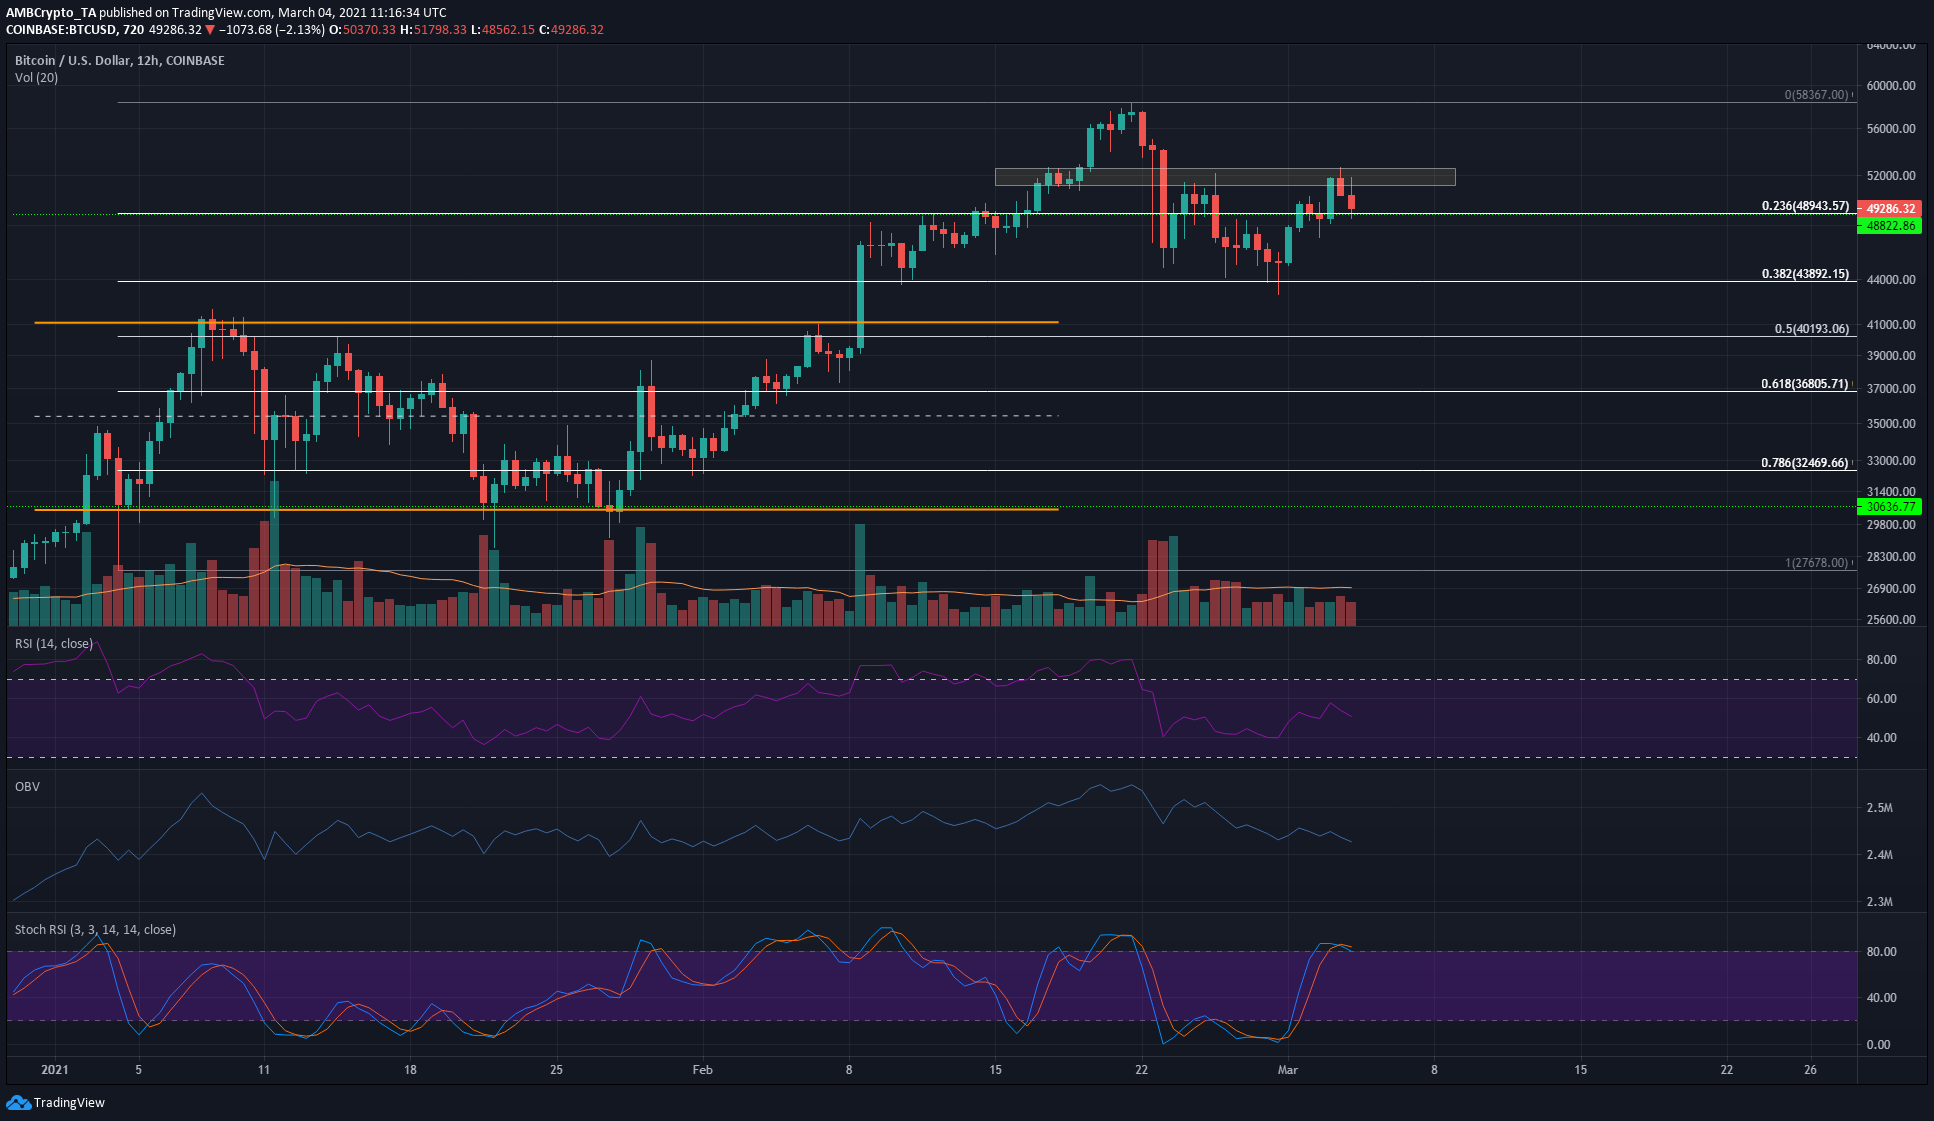 Bitcoin Price Analysis: 04 March